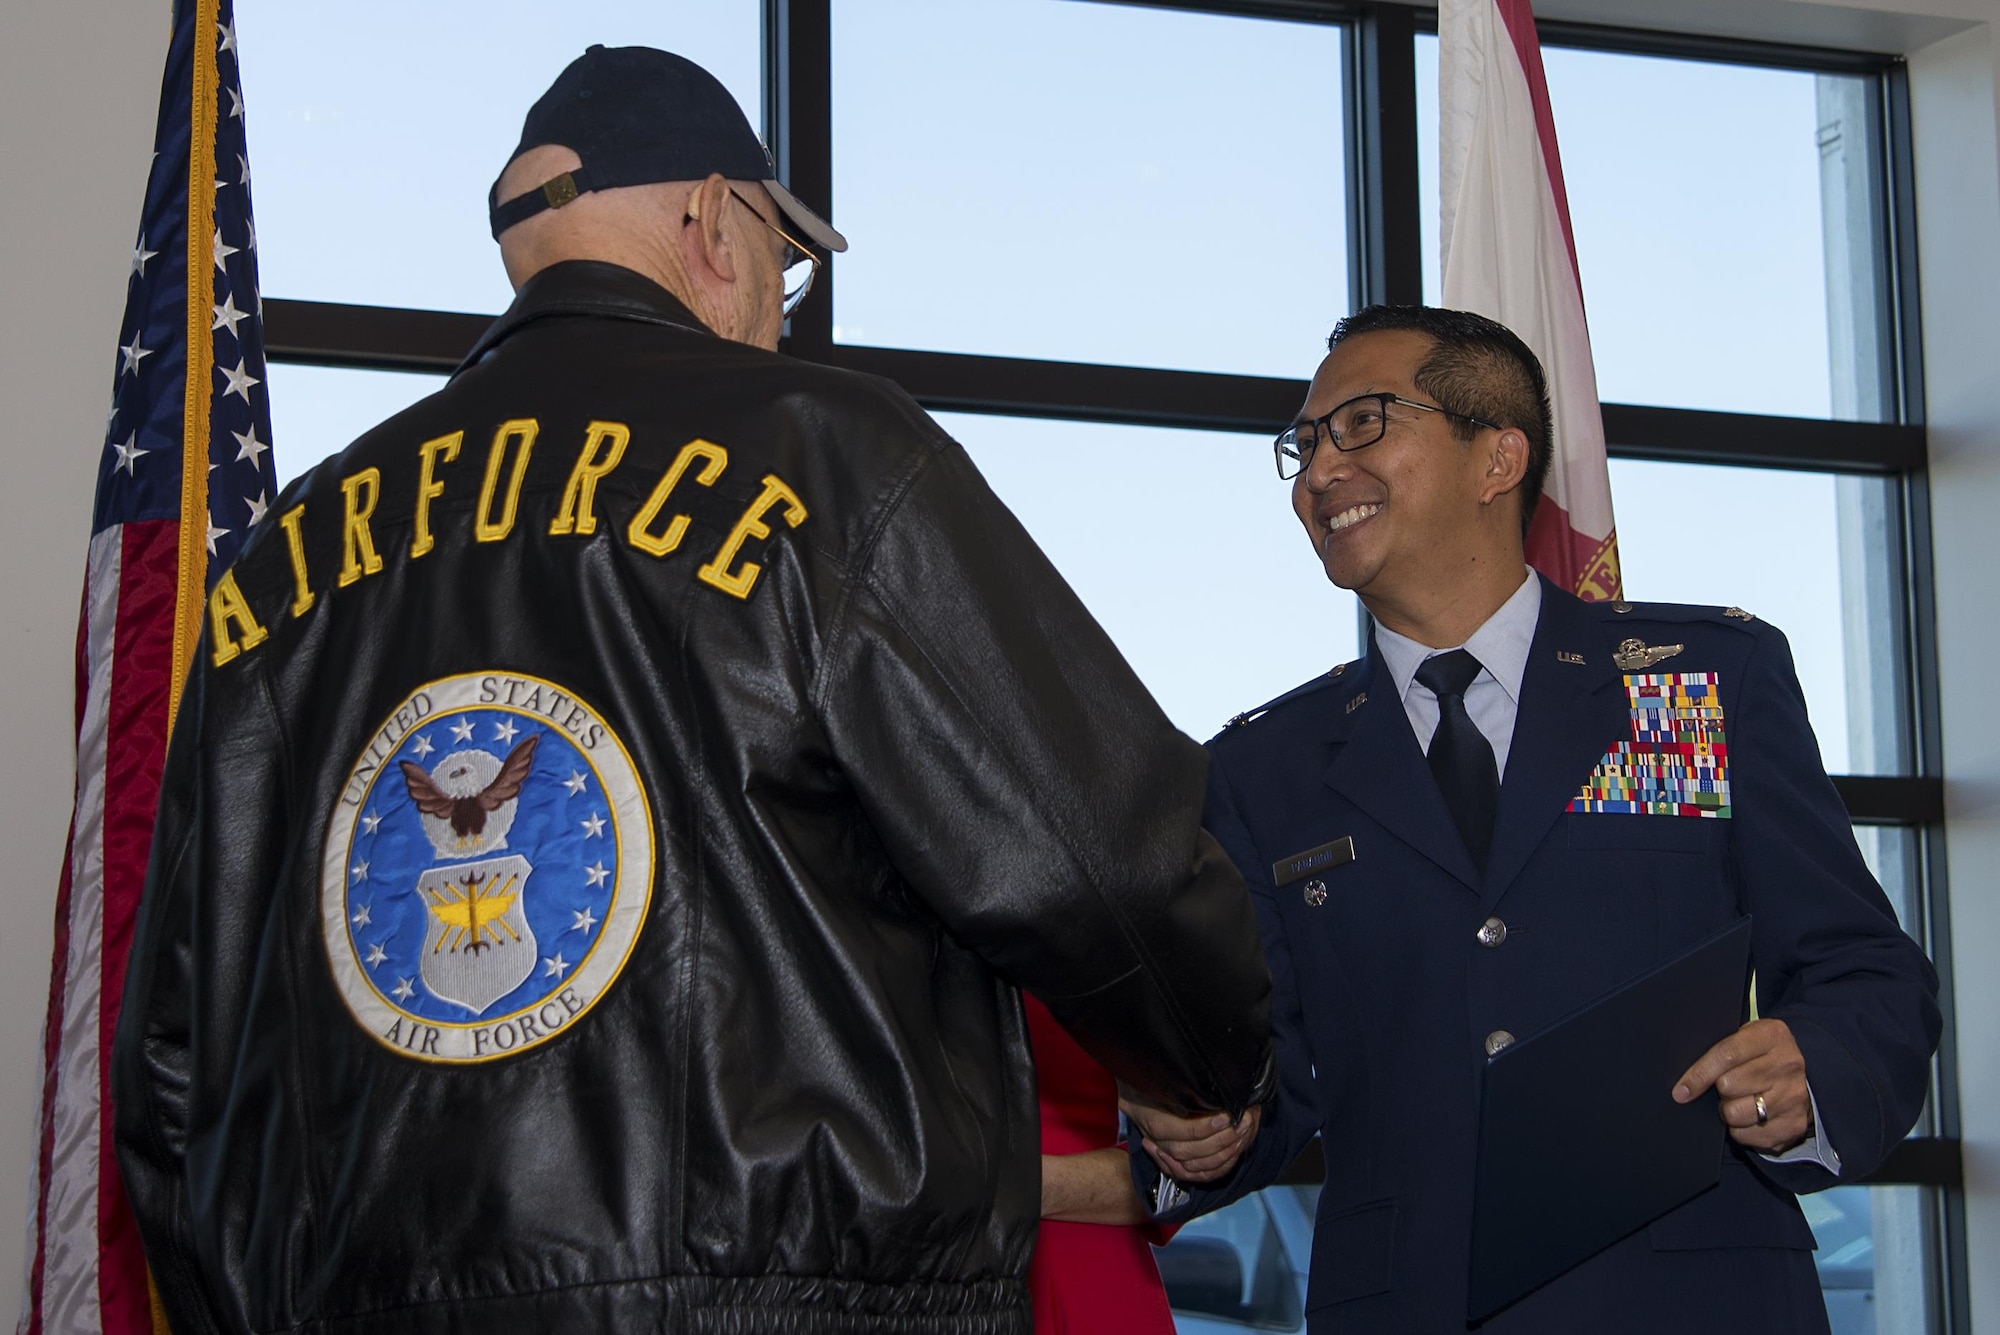 U.S. Air Force Col. Troy Pananon, the 6th Air Mobility Wing vice commander, shakes the hand of a Vietnam veteran Oct. 30, 2017, during the Vietnam Veterans Commemoration event held at the Bryan Glazier Family Jewish Community Center in Tampa, Fla. The veterans received a service lapel as well as a certificate to honor and highlight their service during the Vietnam War.